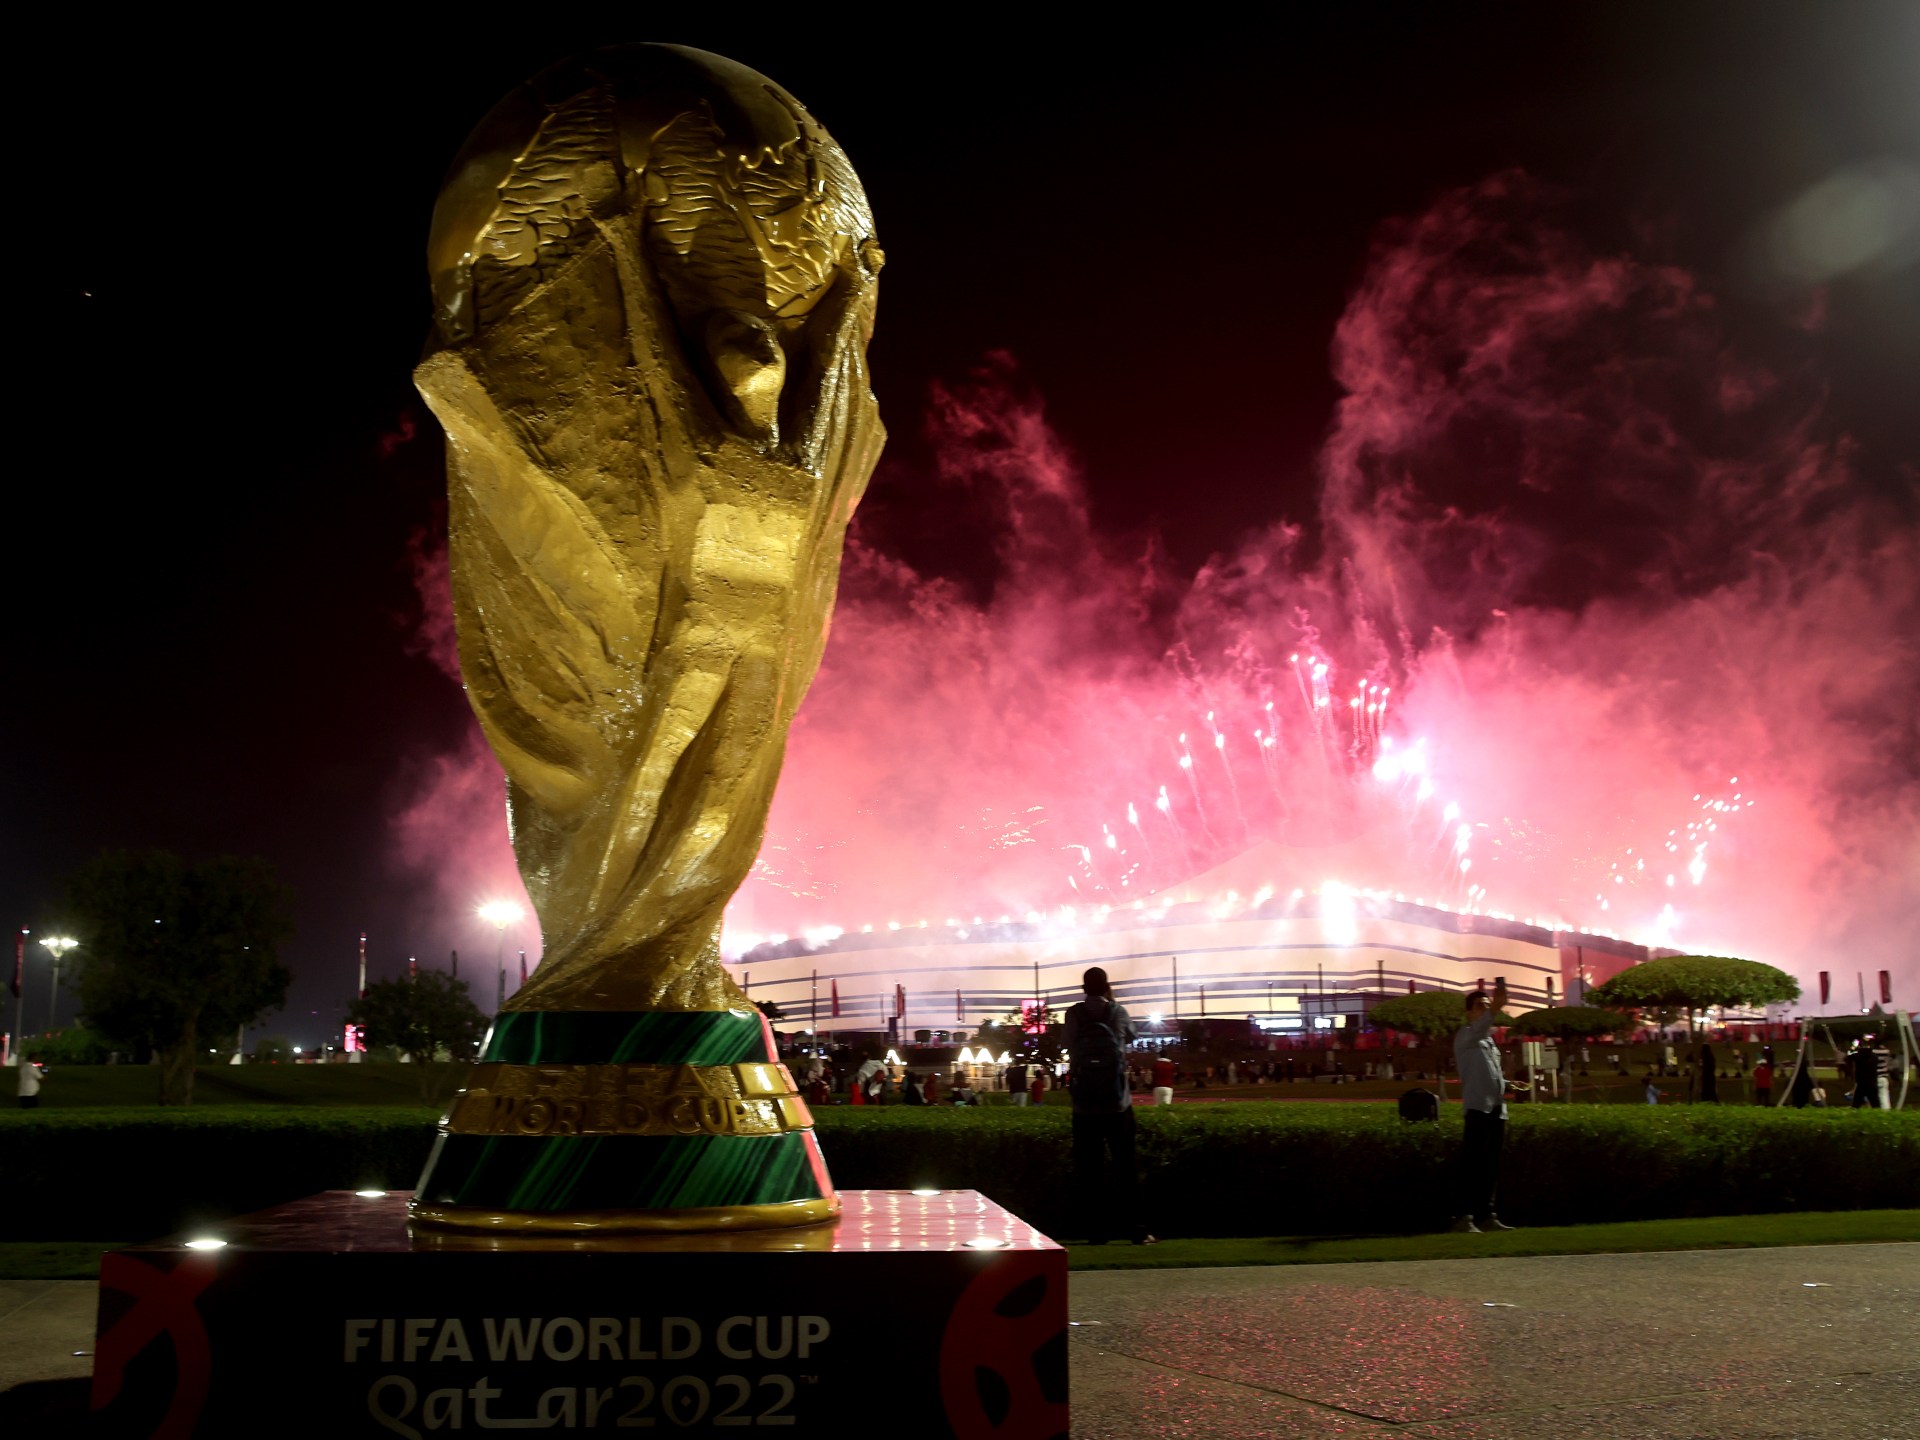 The US information to World Cup 2022 in Qatar